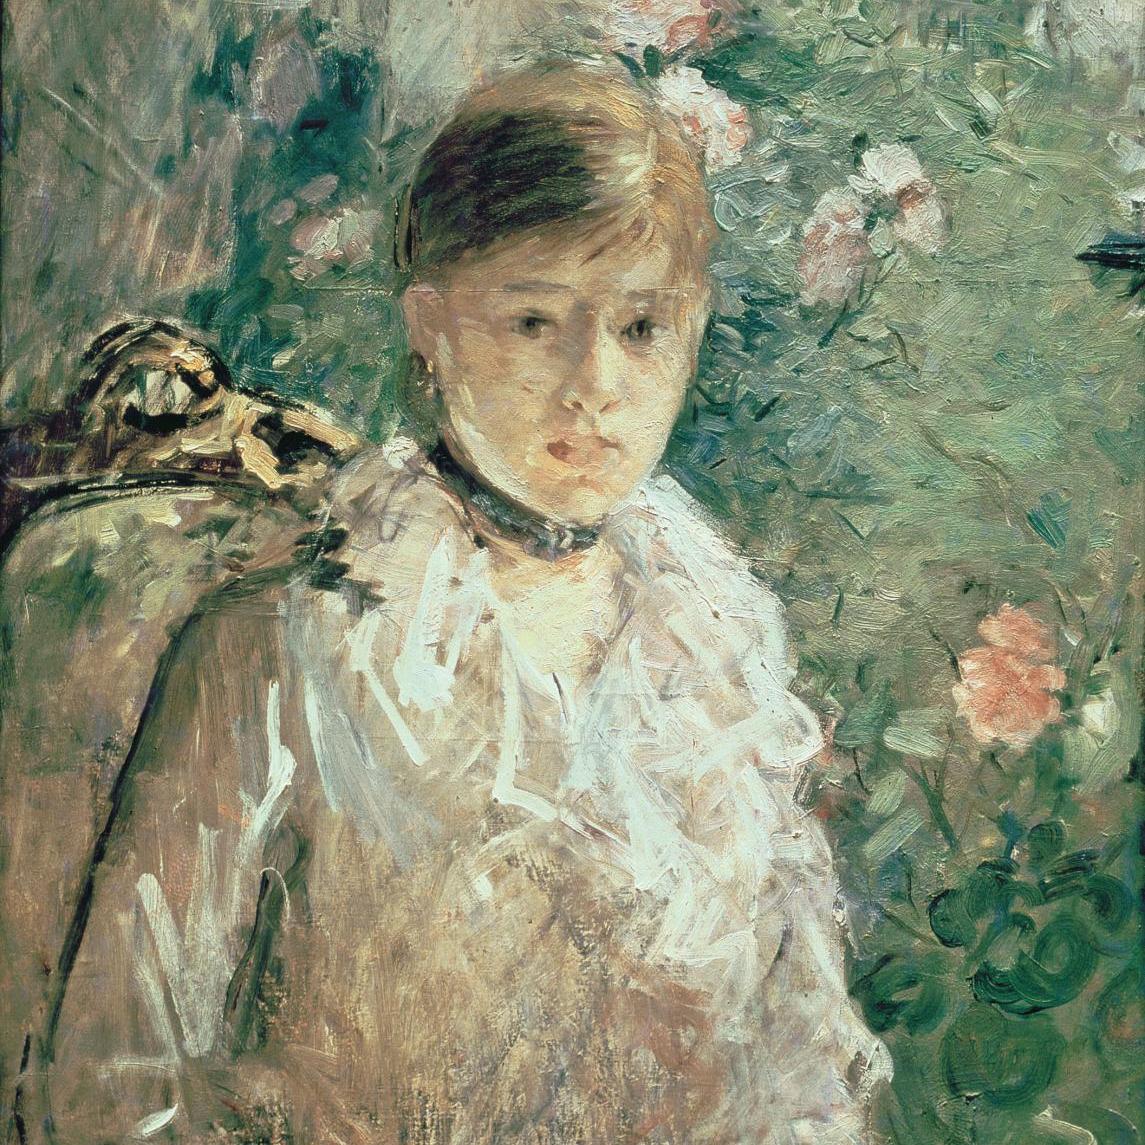  Berthe Morisot: From Obscurity to Light - Exhibitions